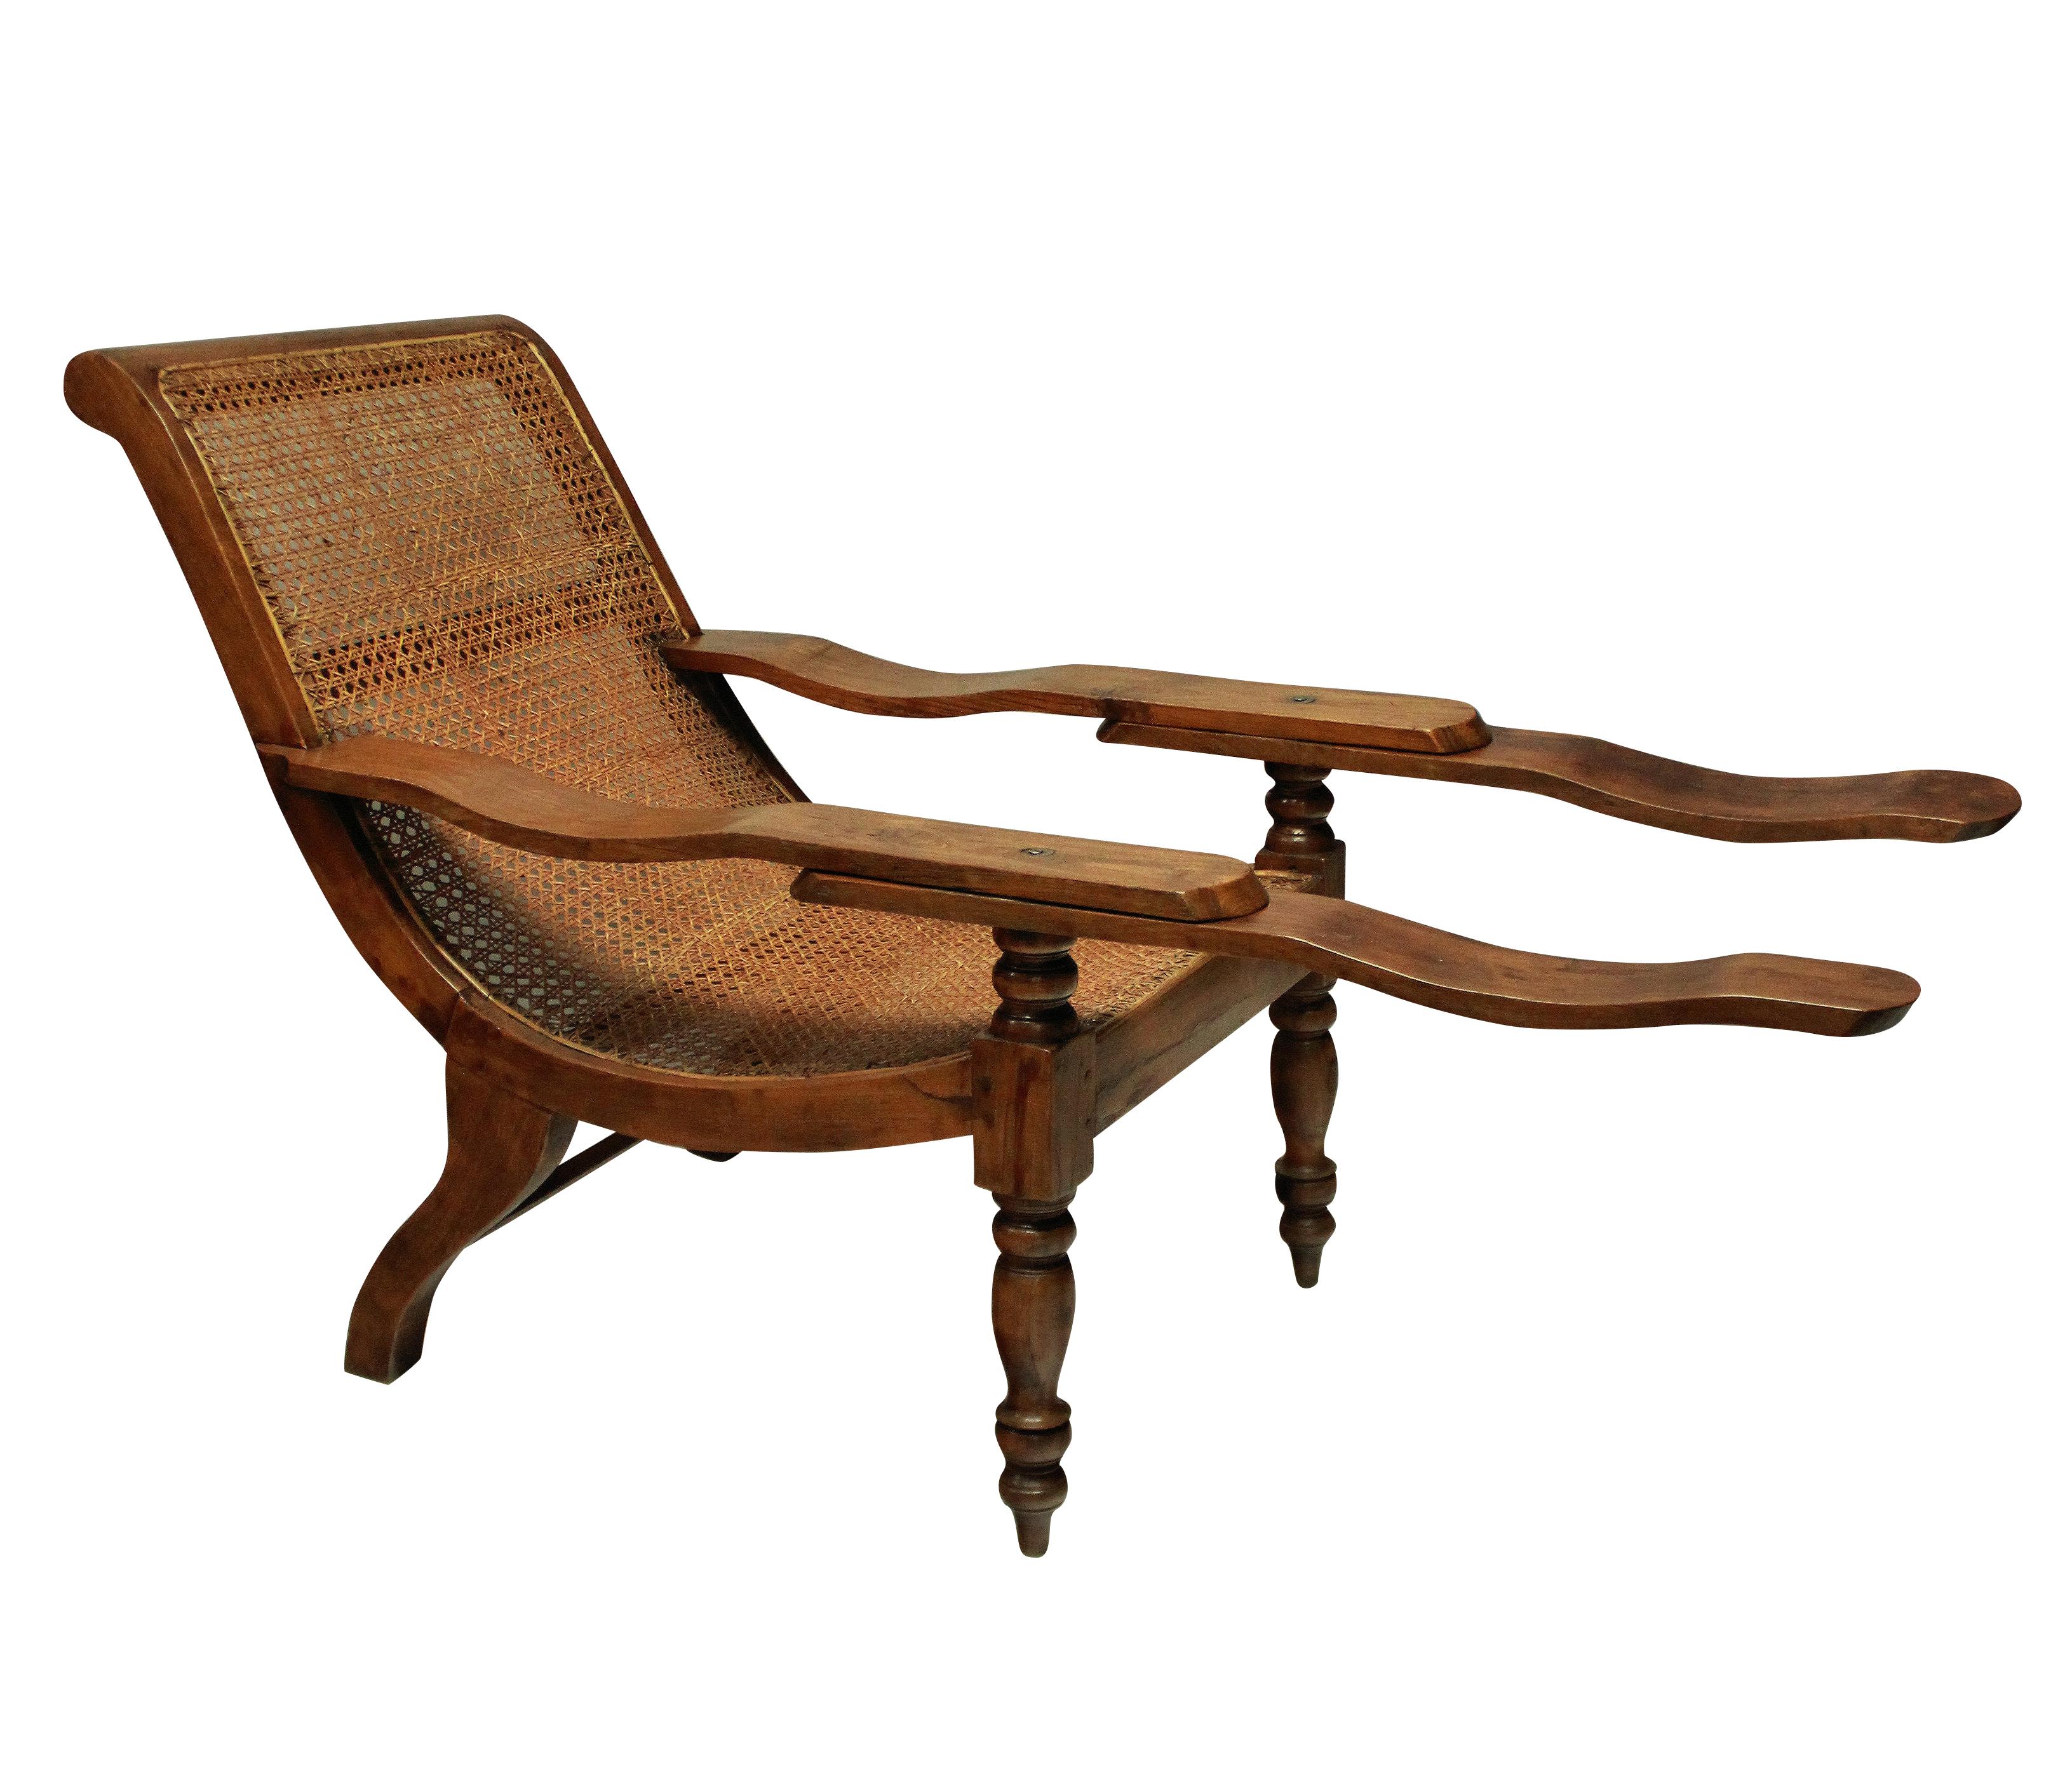 A large colonial, solid teak plantation chair, beautifully restored and with its original cane work intact. With swing-out leg rests.

Measures: 97cm high (back) x 47cm high (seat) x 72cm wide x 115cm deep x 166cm deep (open).